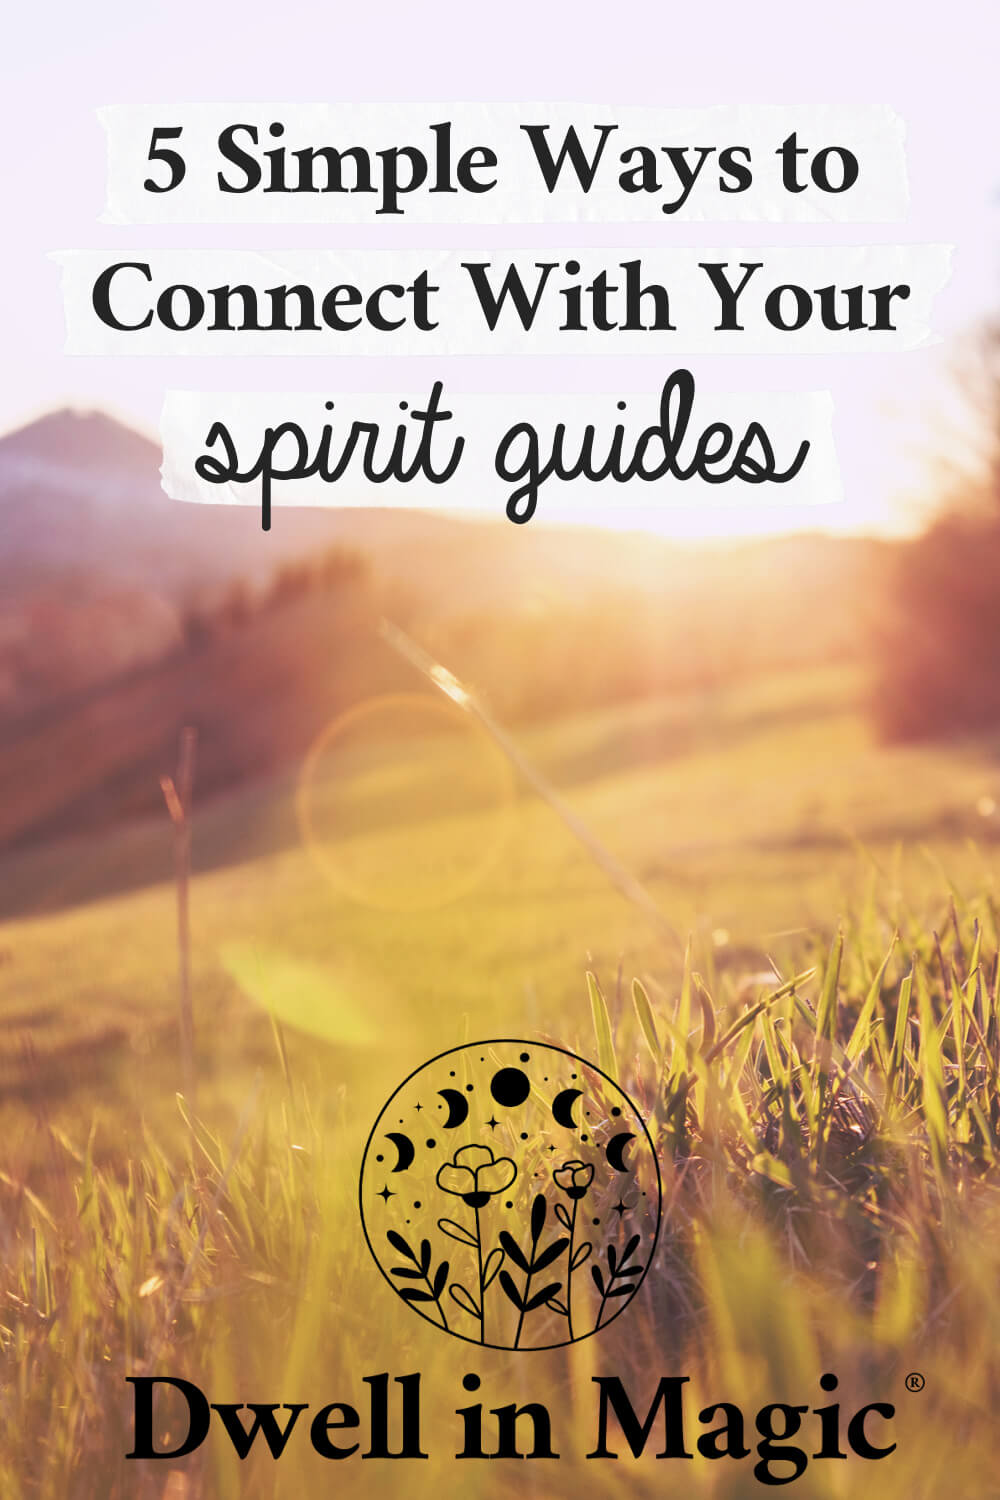 5 simple ways to connect with your spirit guides 